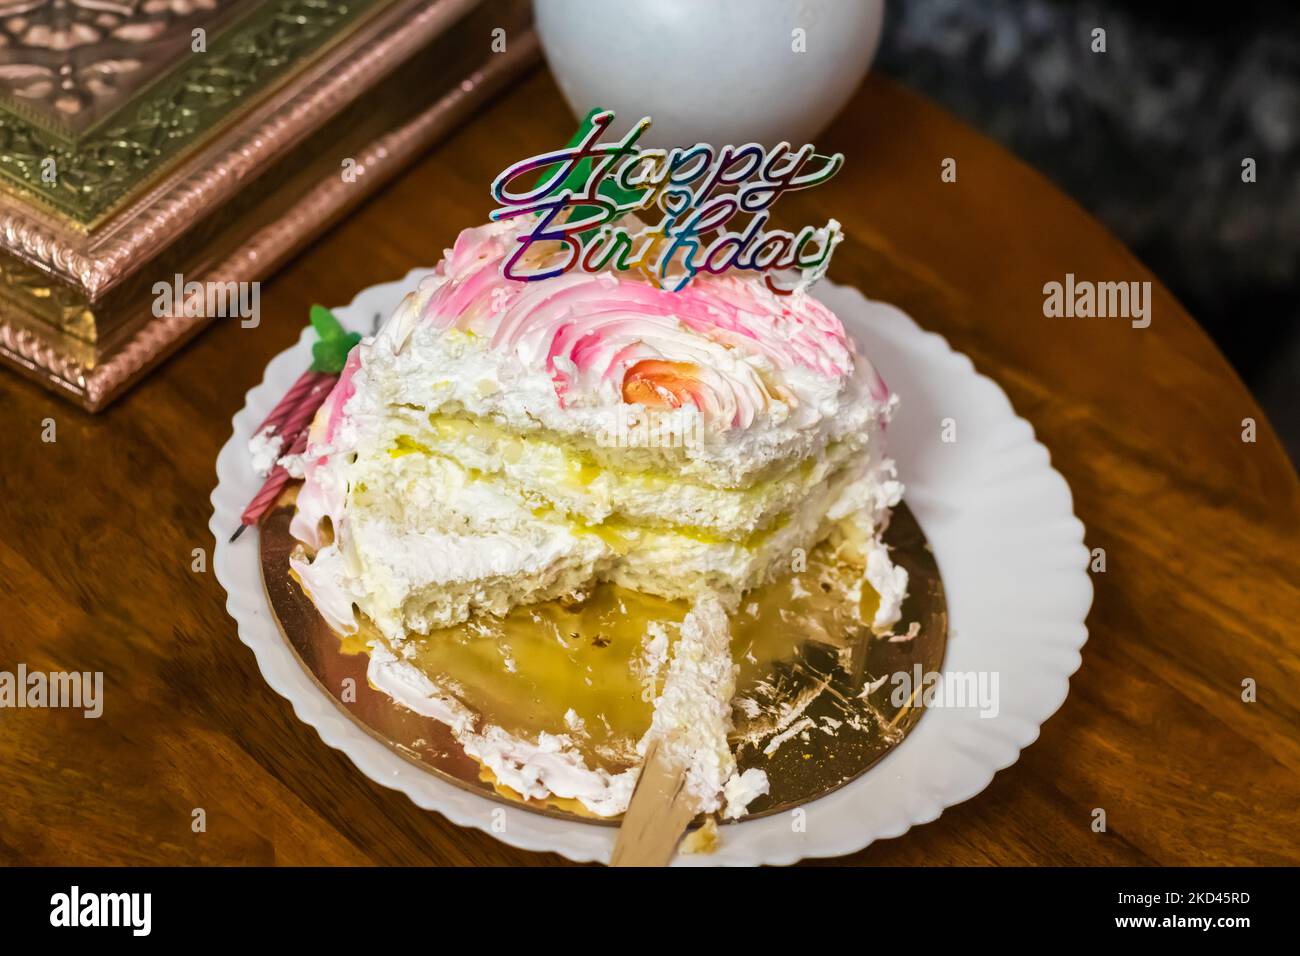 sliced birthday pineapple cake from different angle Stock Photo